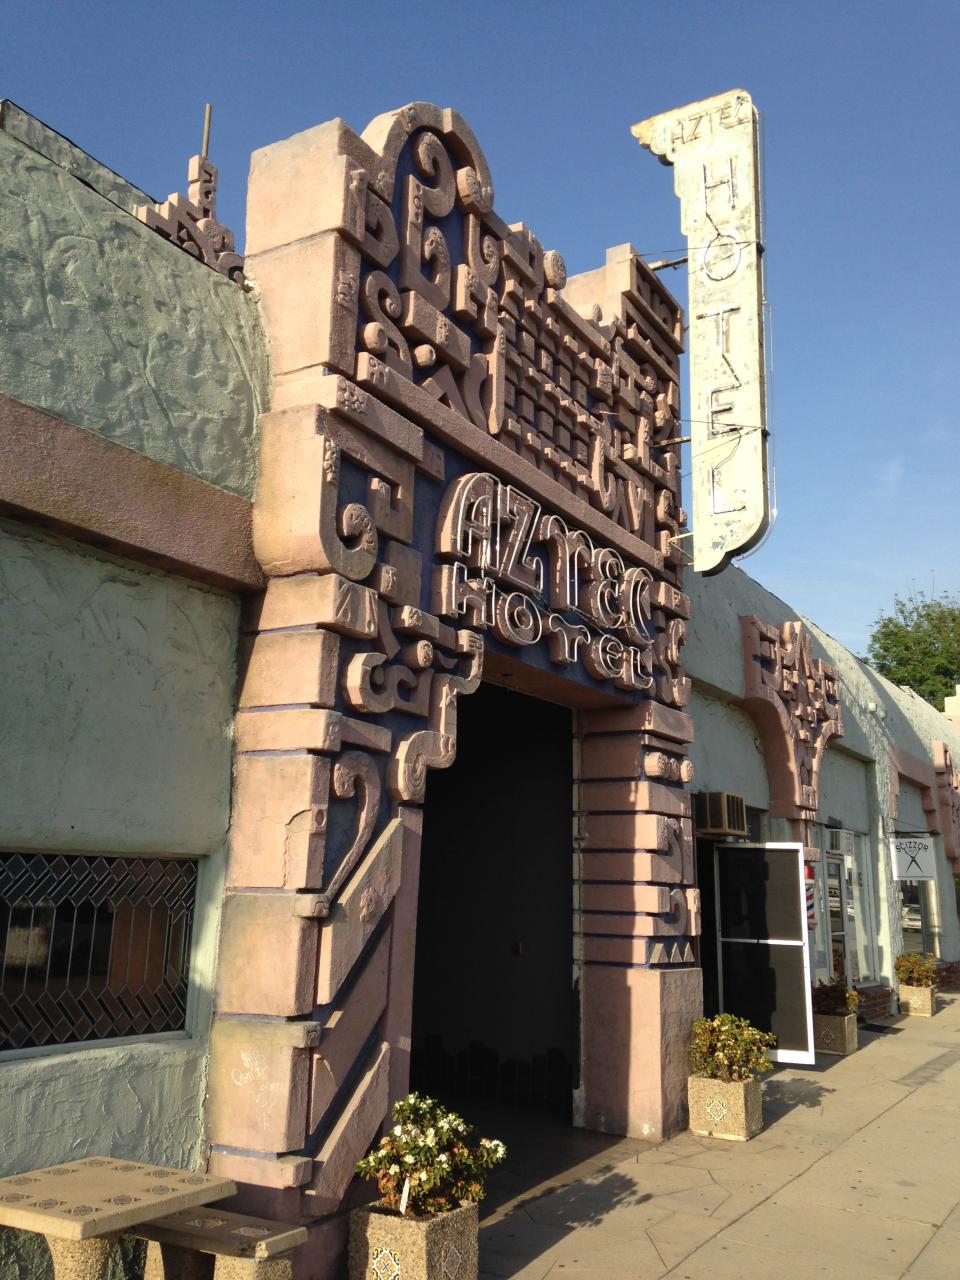 Stop at the Aztec Hotel in Monrovia for some history and cool photos.